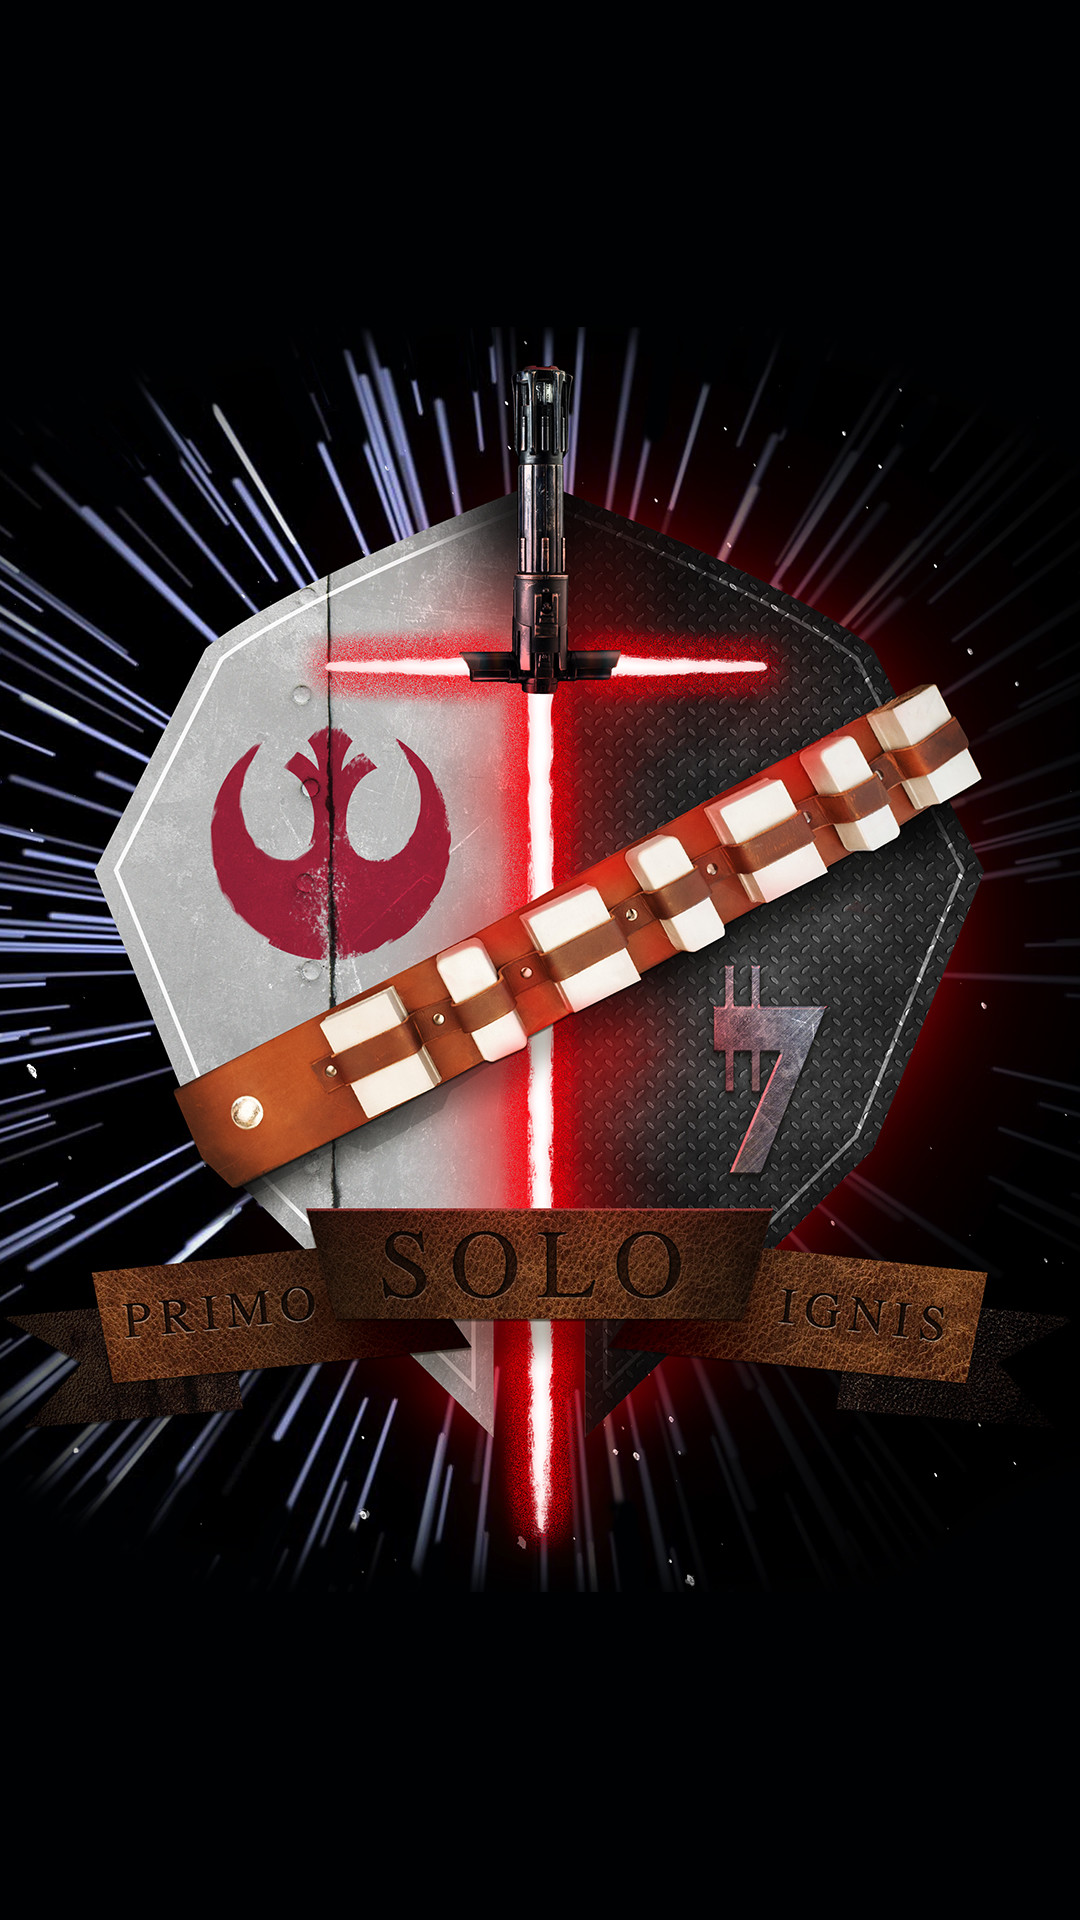 1080x1920 Star Wars Family Crest Han Solo Primo Solo Ignis iPhone 6+ HD Wallpaper ...